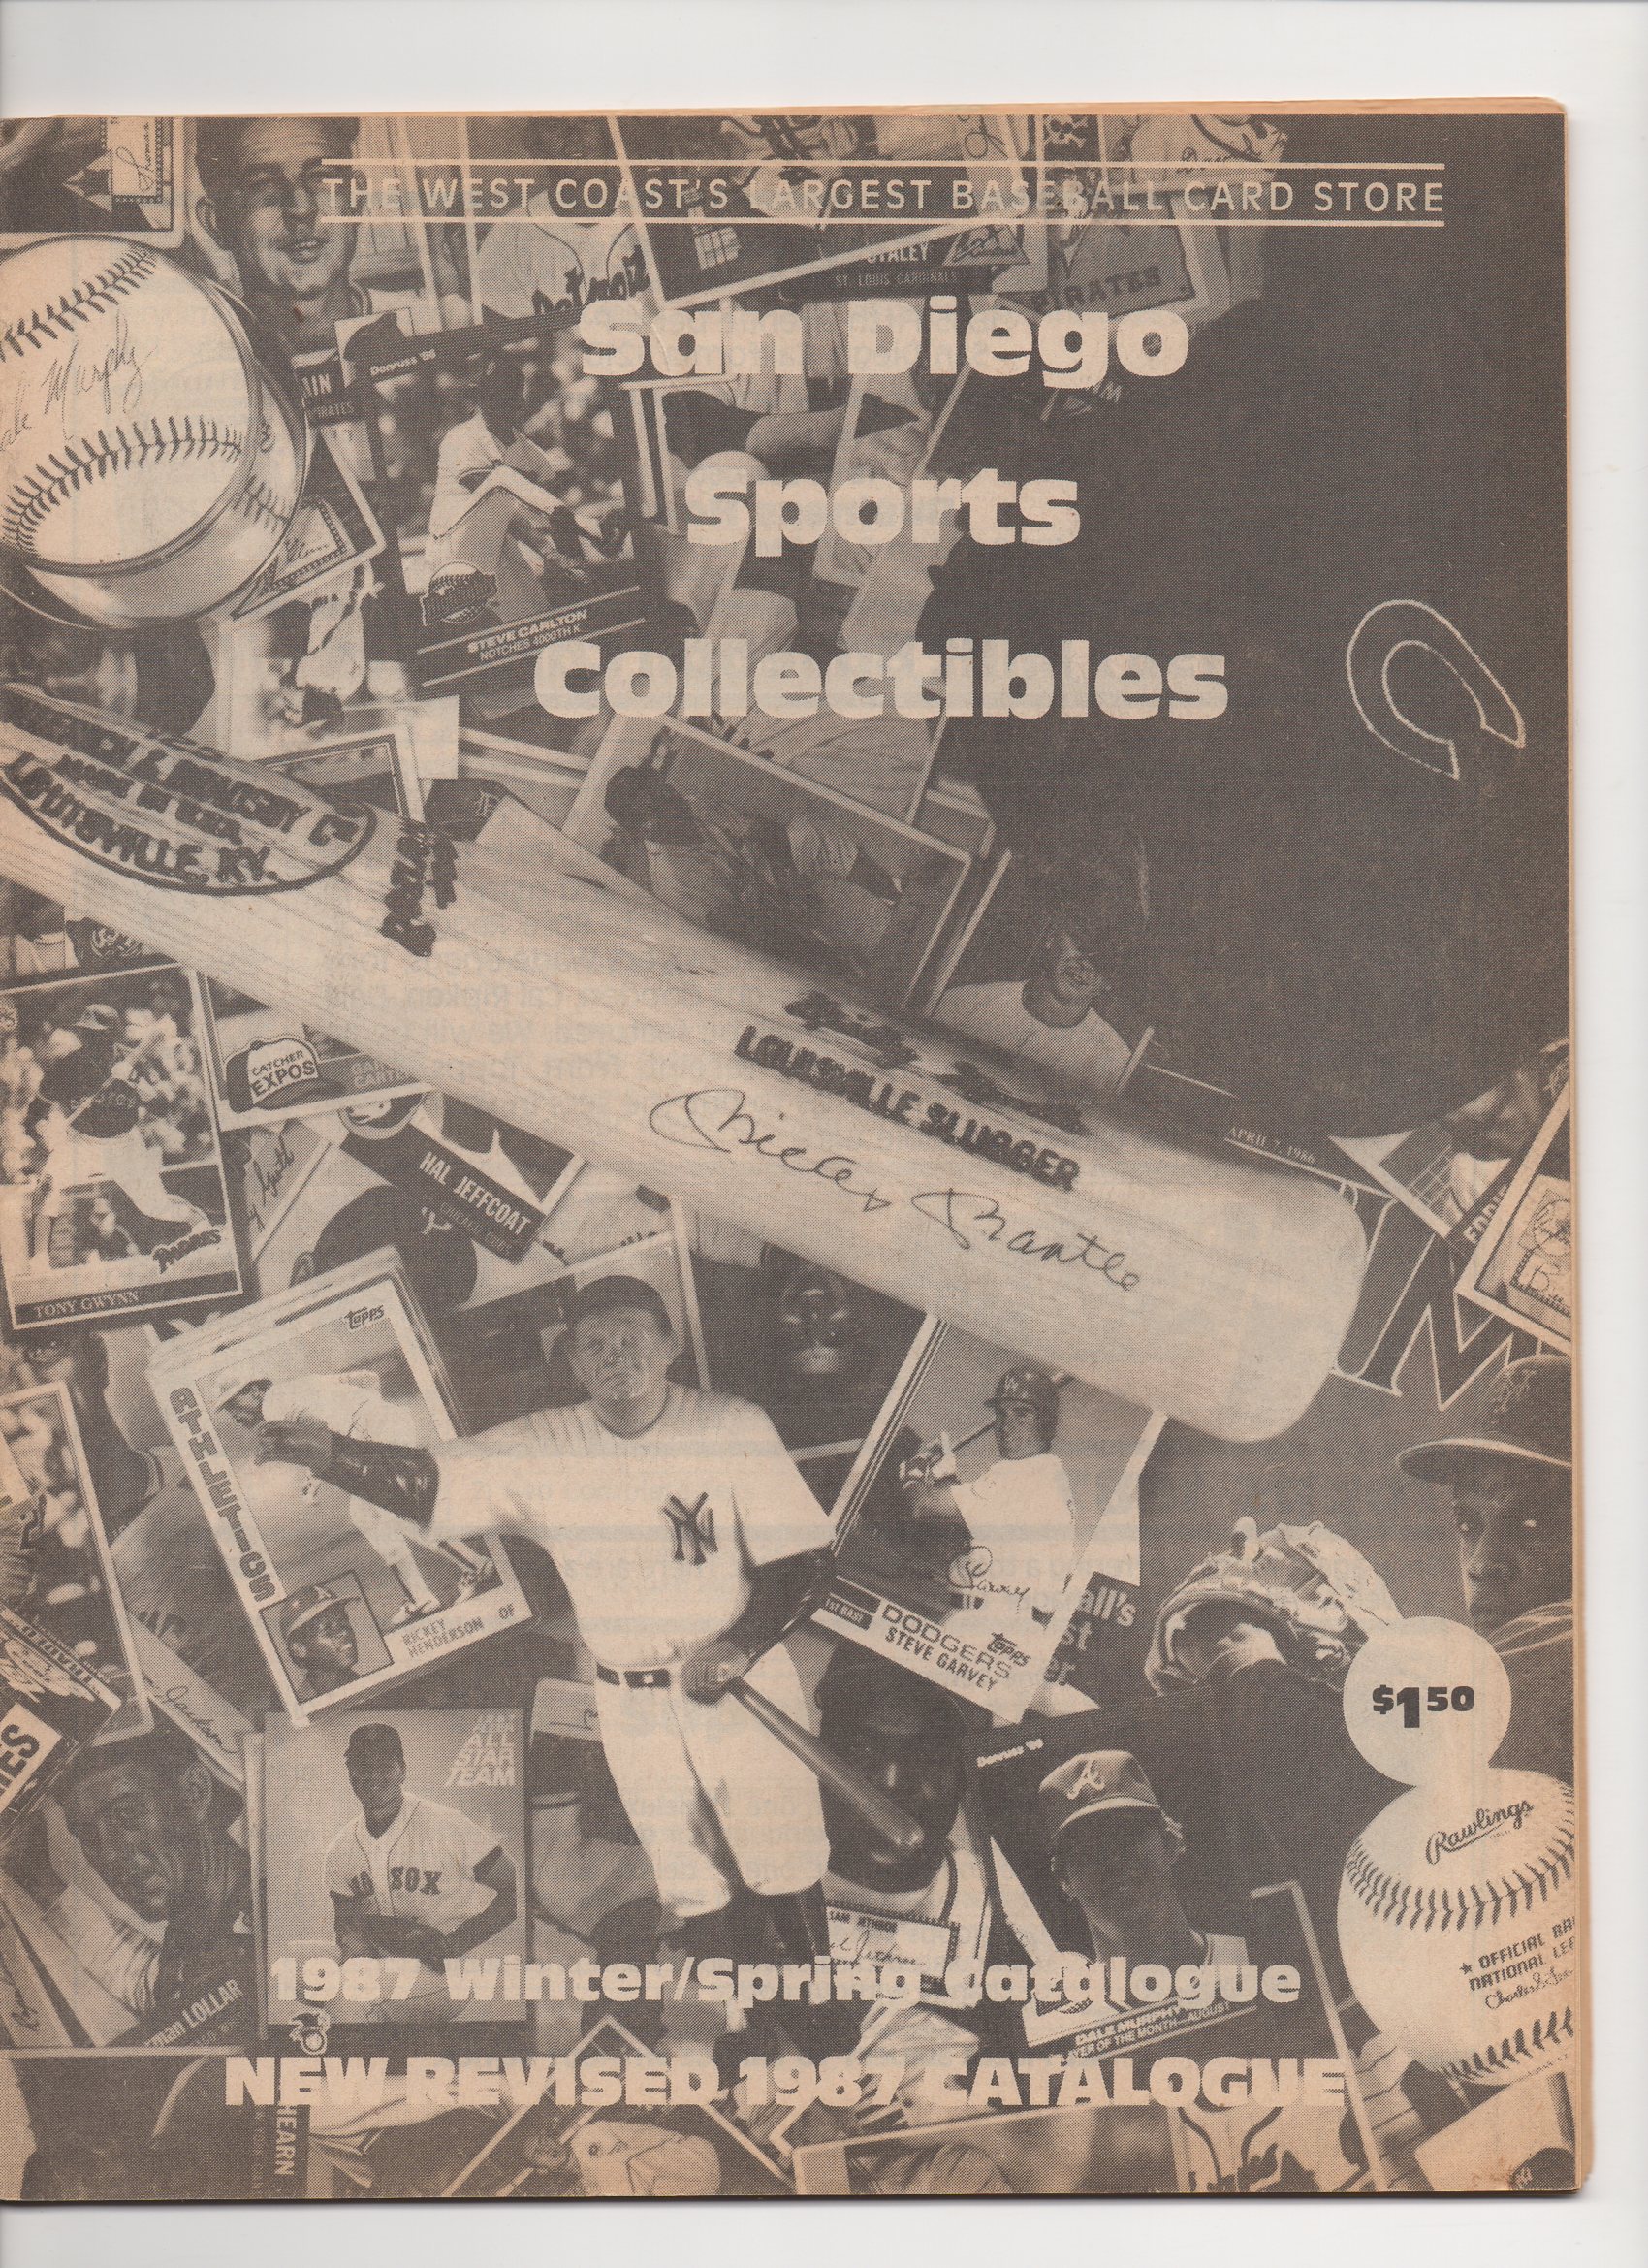 1987 san diego sports collectibles, winter/spring catalog